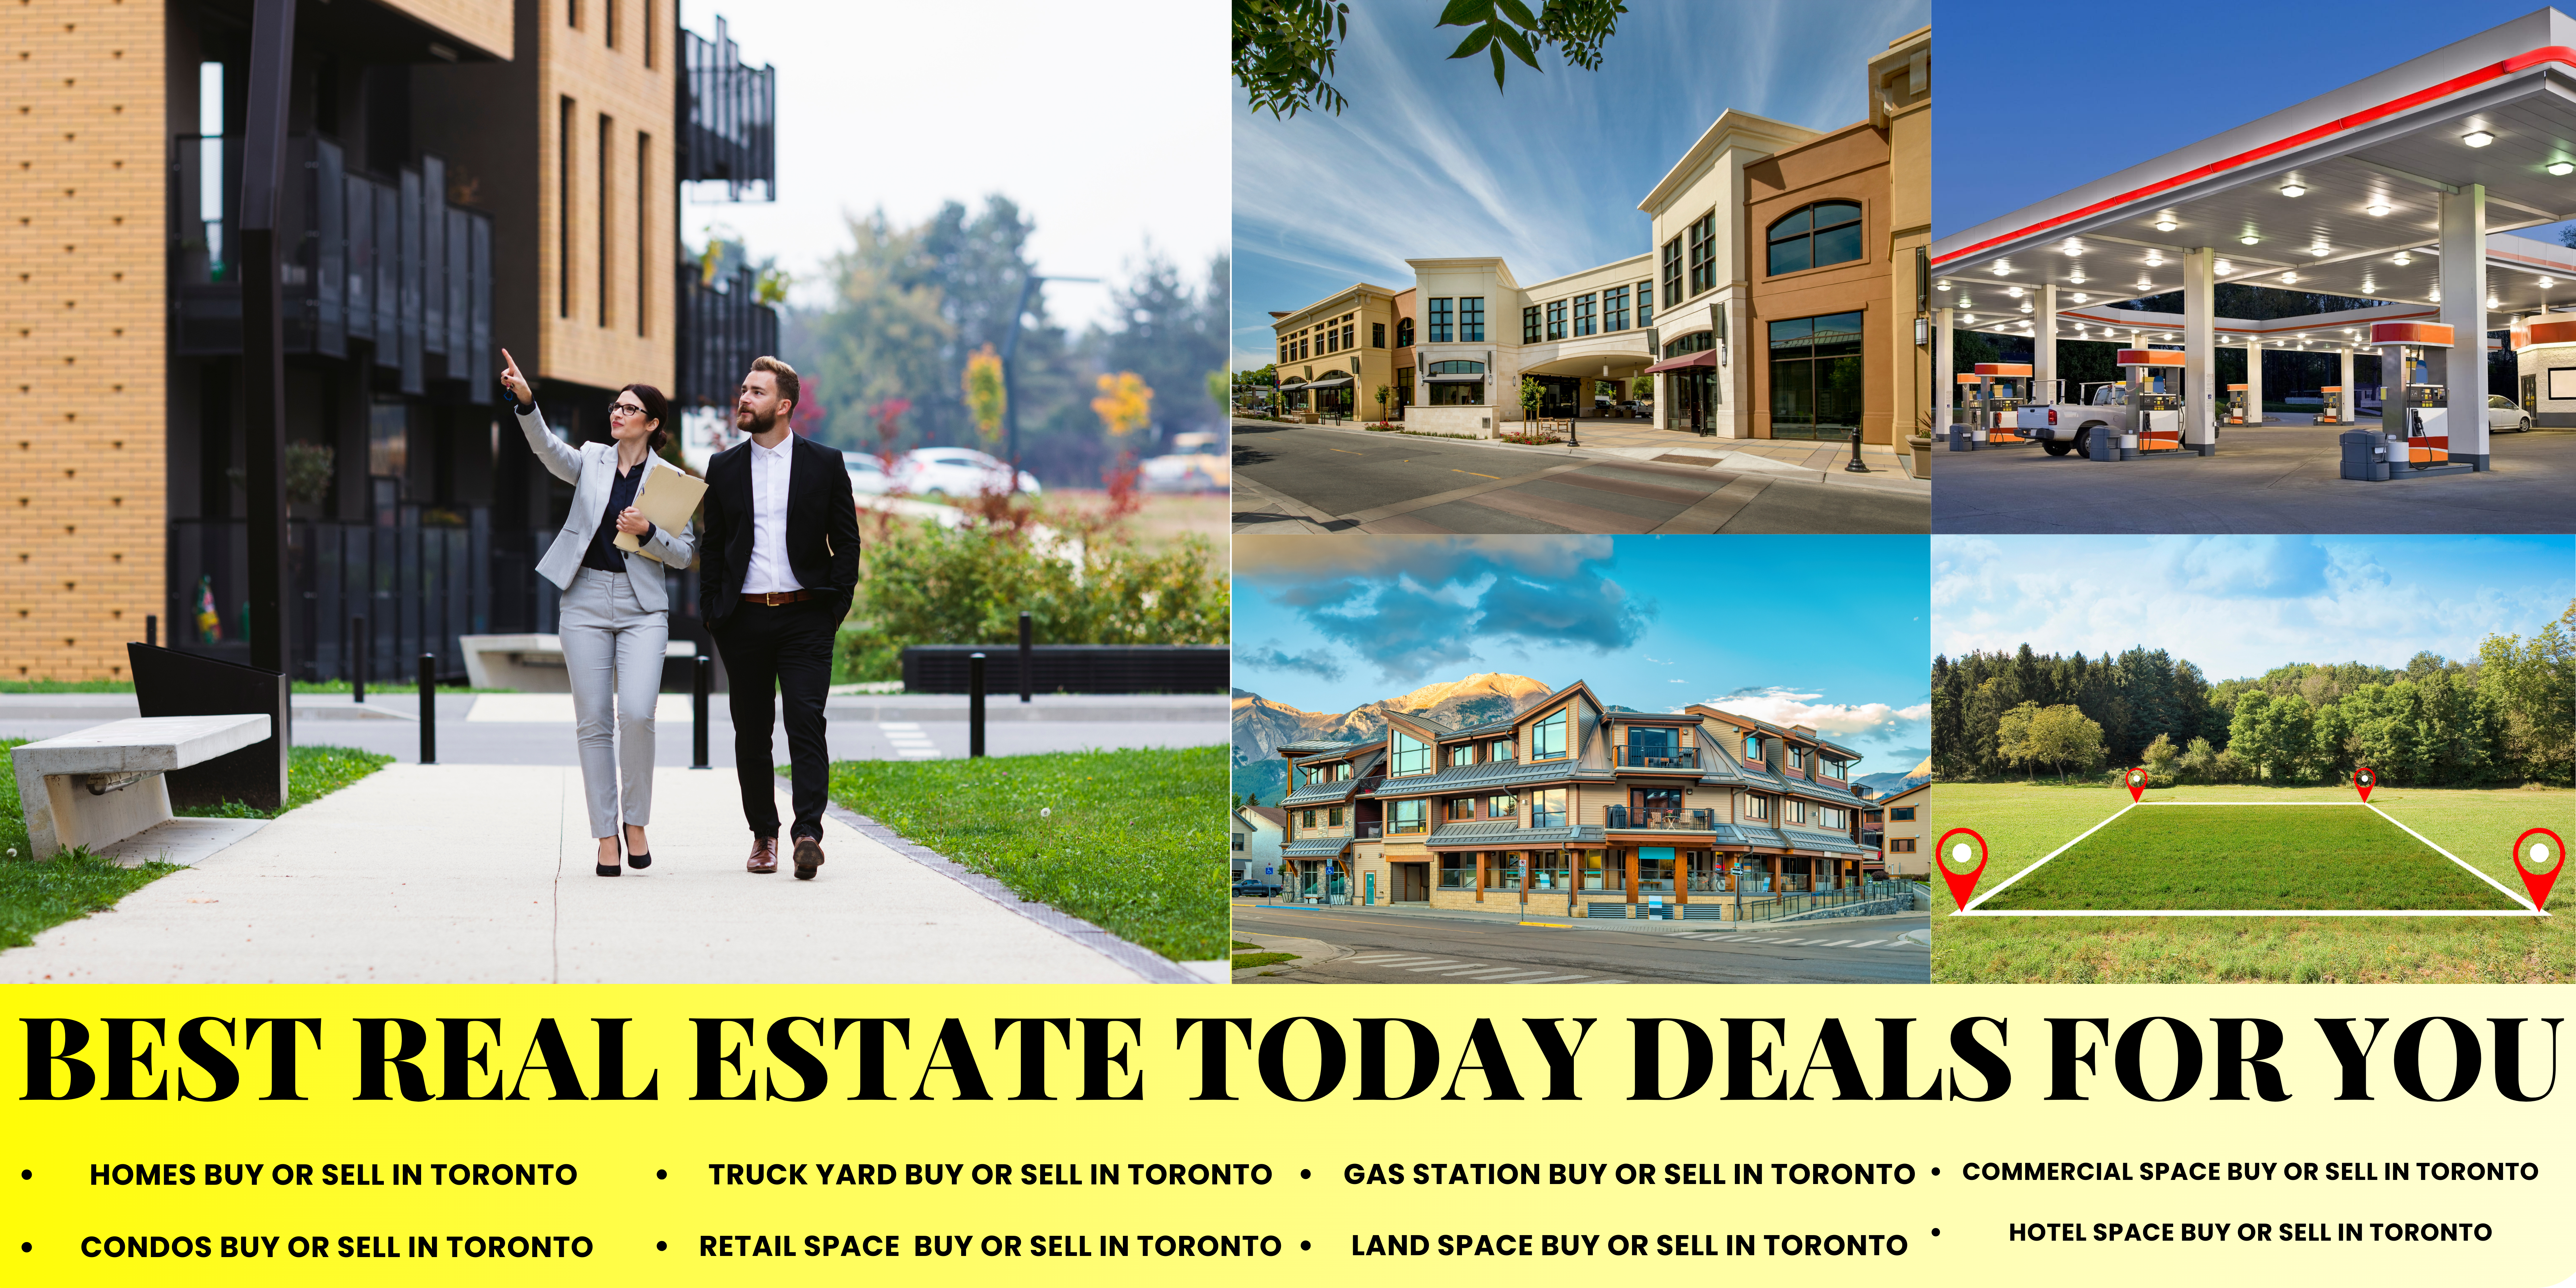 Best Real Estate Today Deals for You in Ontario, Canada